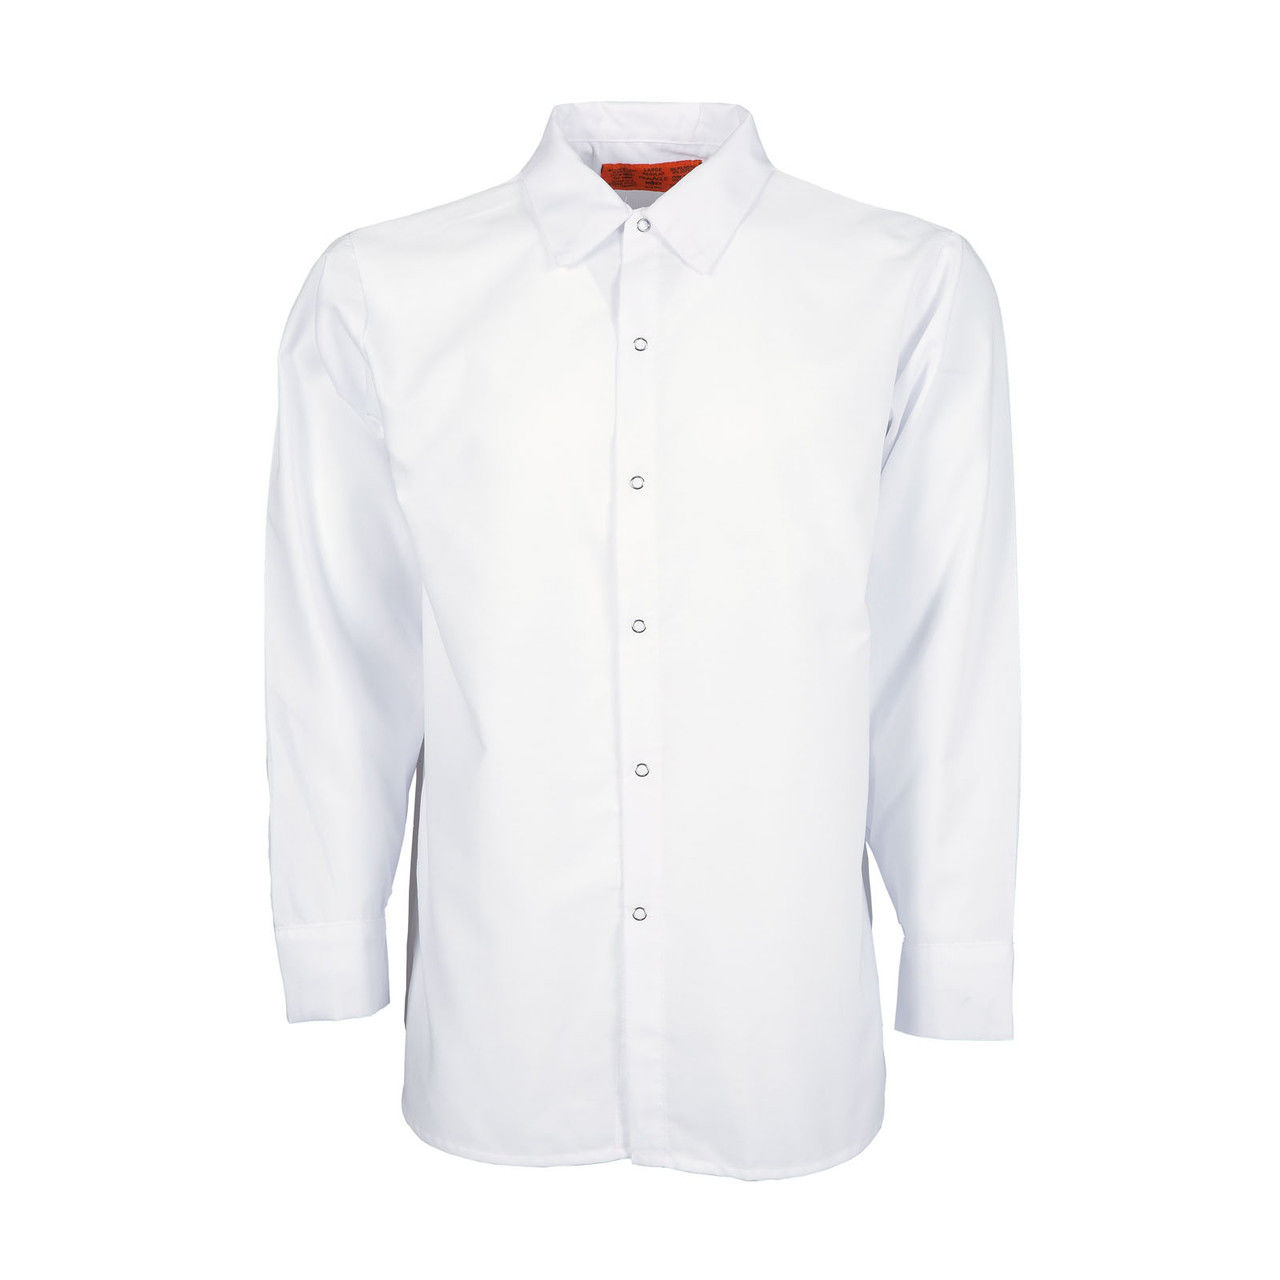 Where do these white work shirts mens ship from?